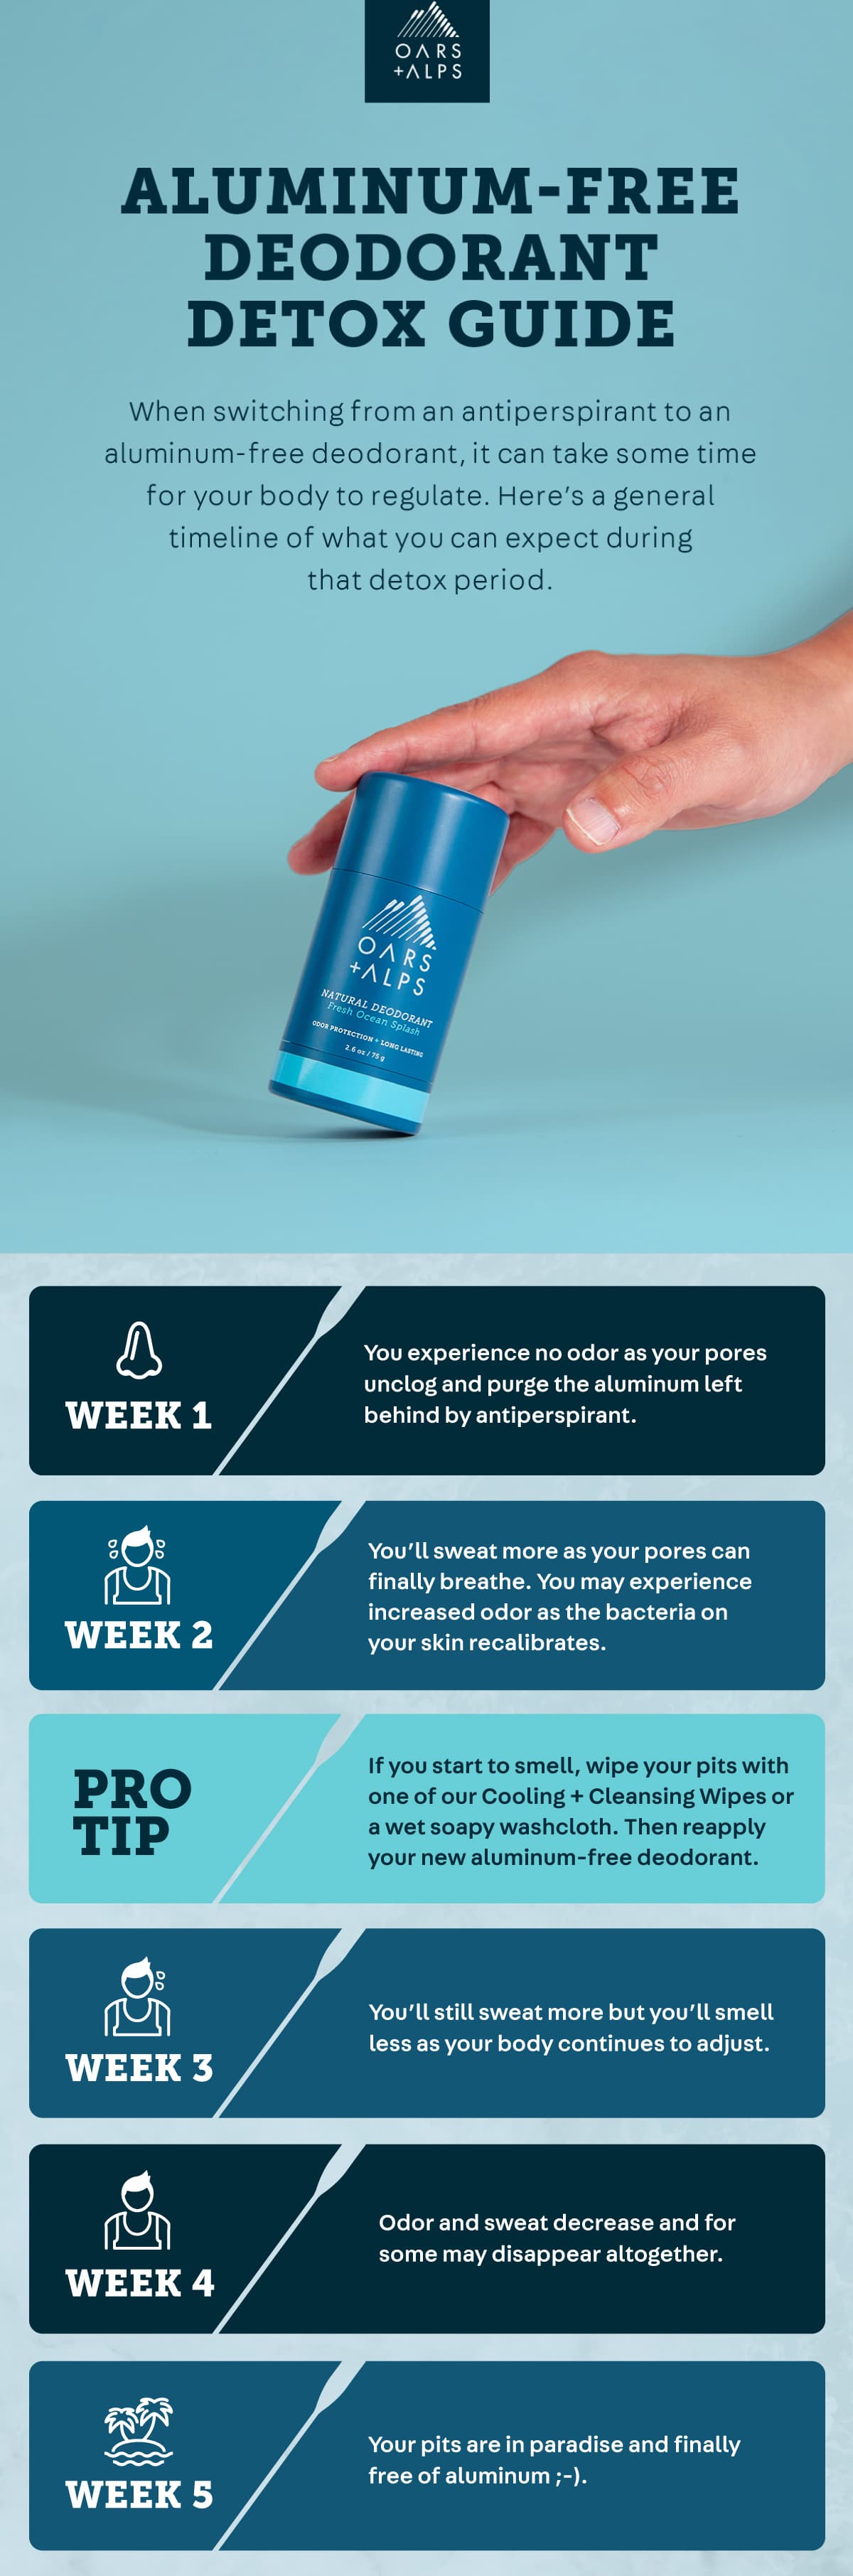 Week by week steps for switching to aluminum-free deodornat